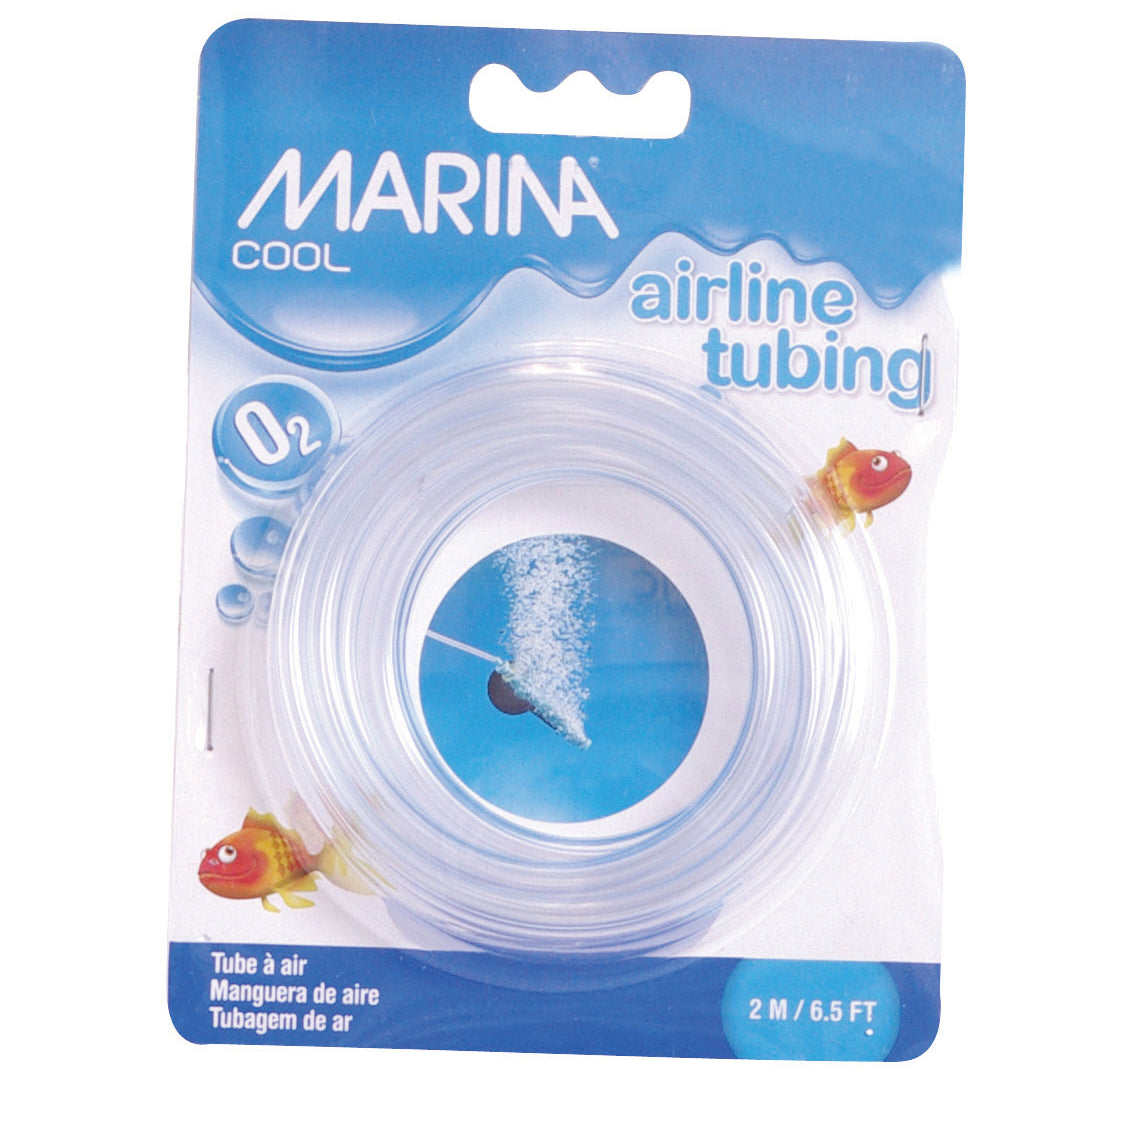 Marina Cool Clear Airline Tubing, 2 m (6.5 ft)